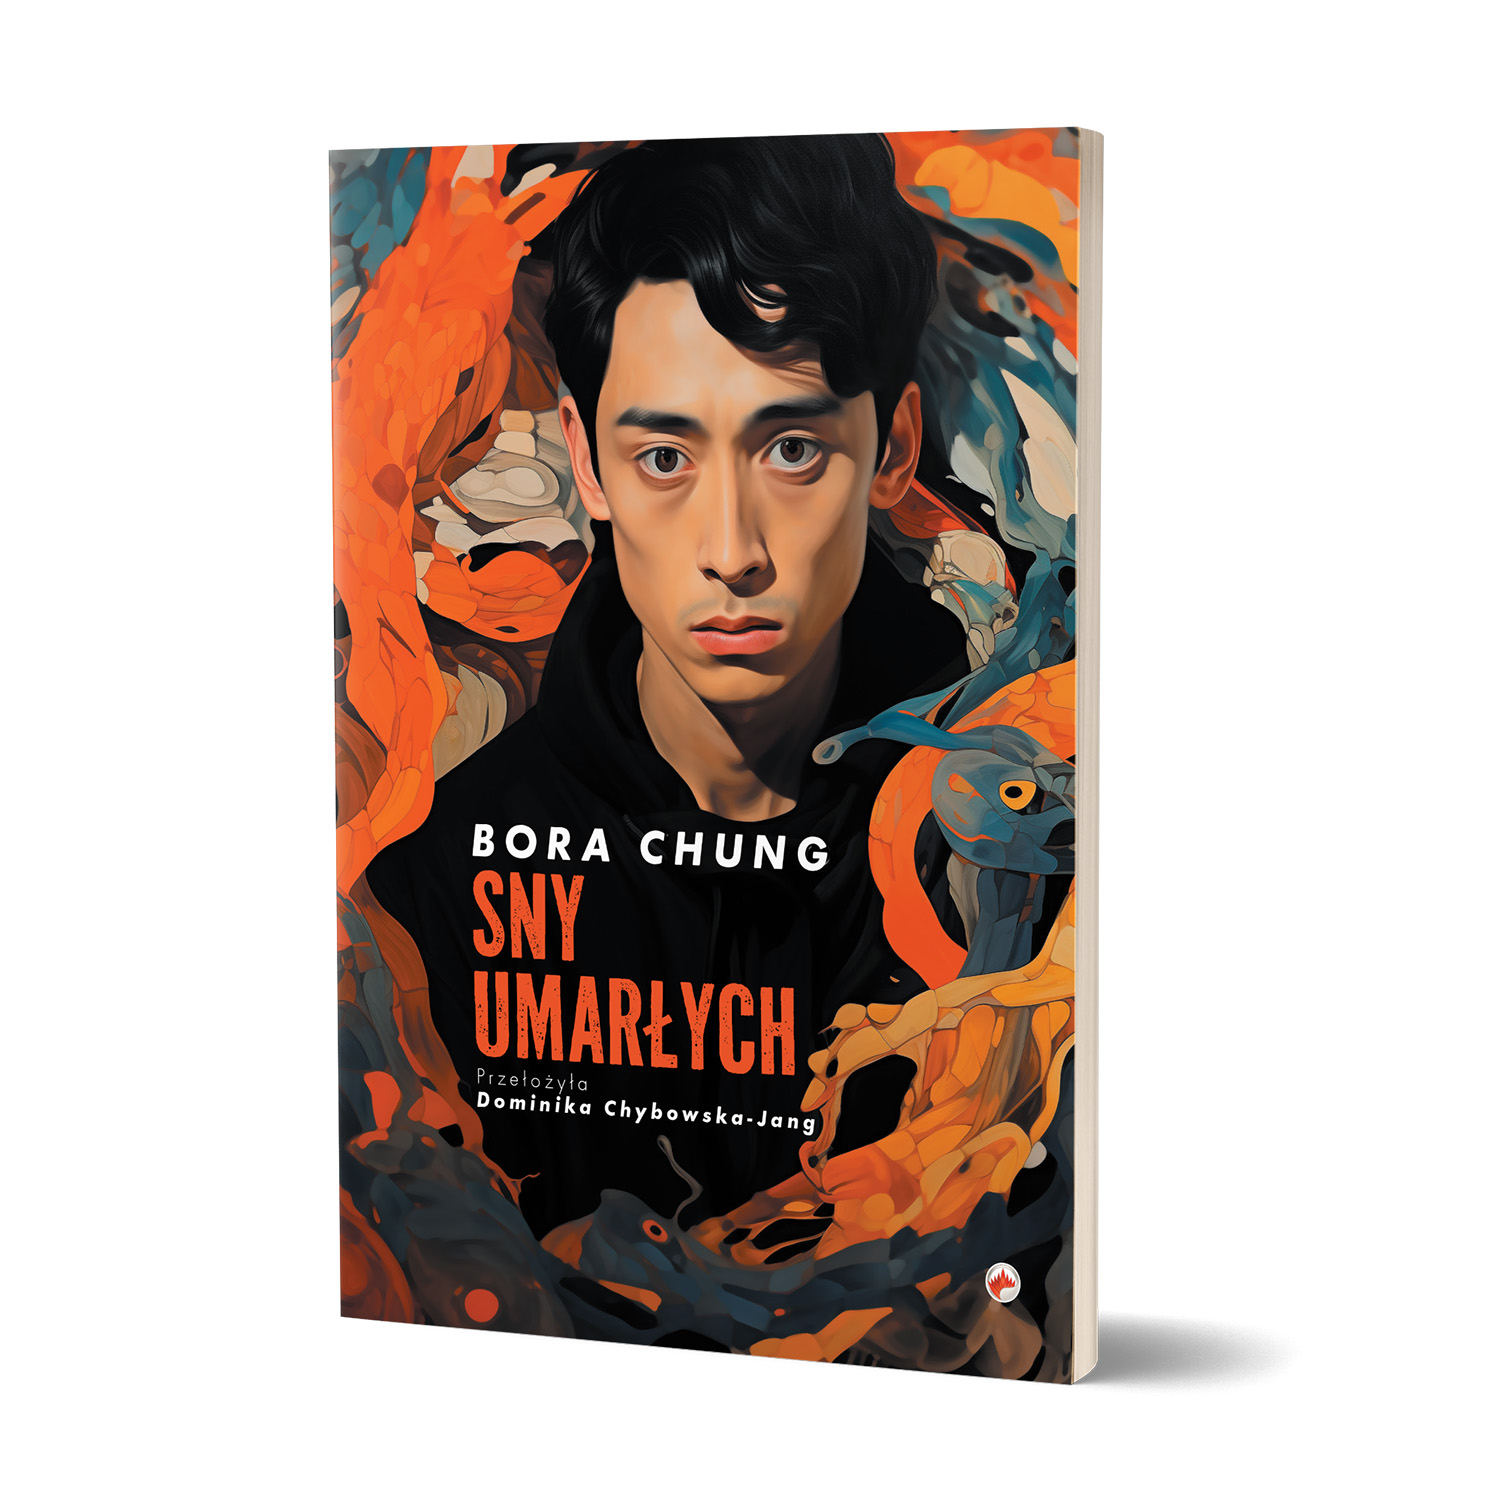 'SNY UMARŁYCH' is the exclusive Polish language release of a science fiction novel by Booker-nominated author Bora Chung. The cover design is Mark Thomas of coverness.com. To find out more about my book design services, please visit www.coverness.com.